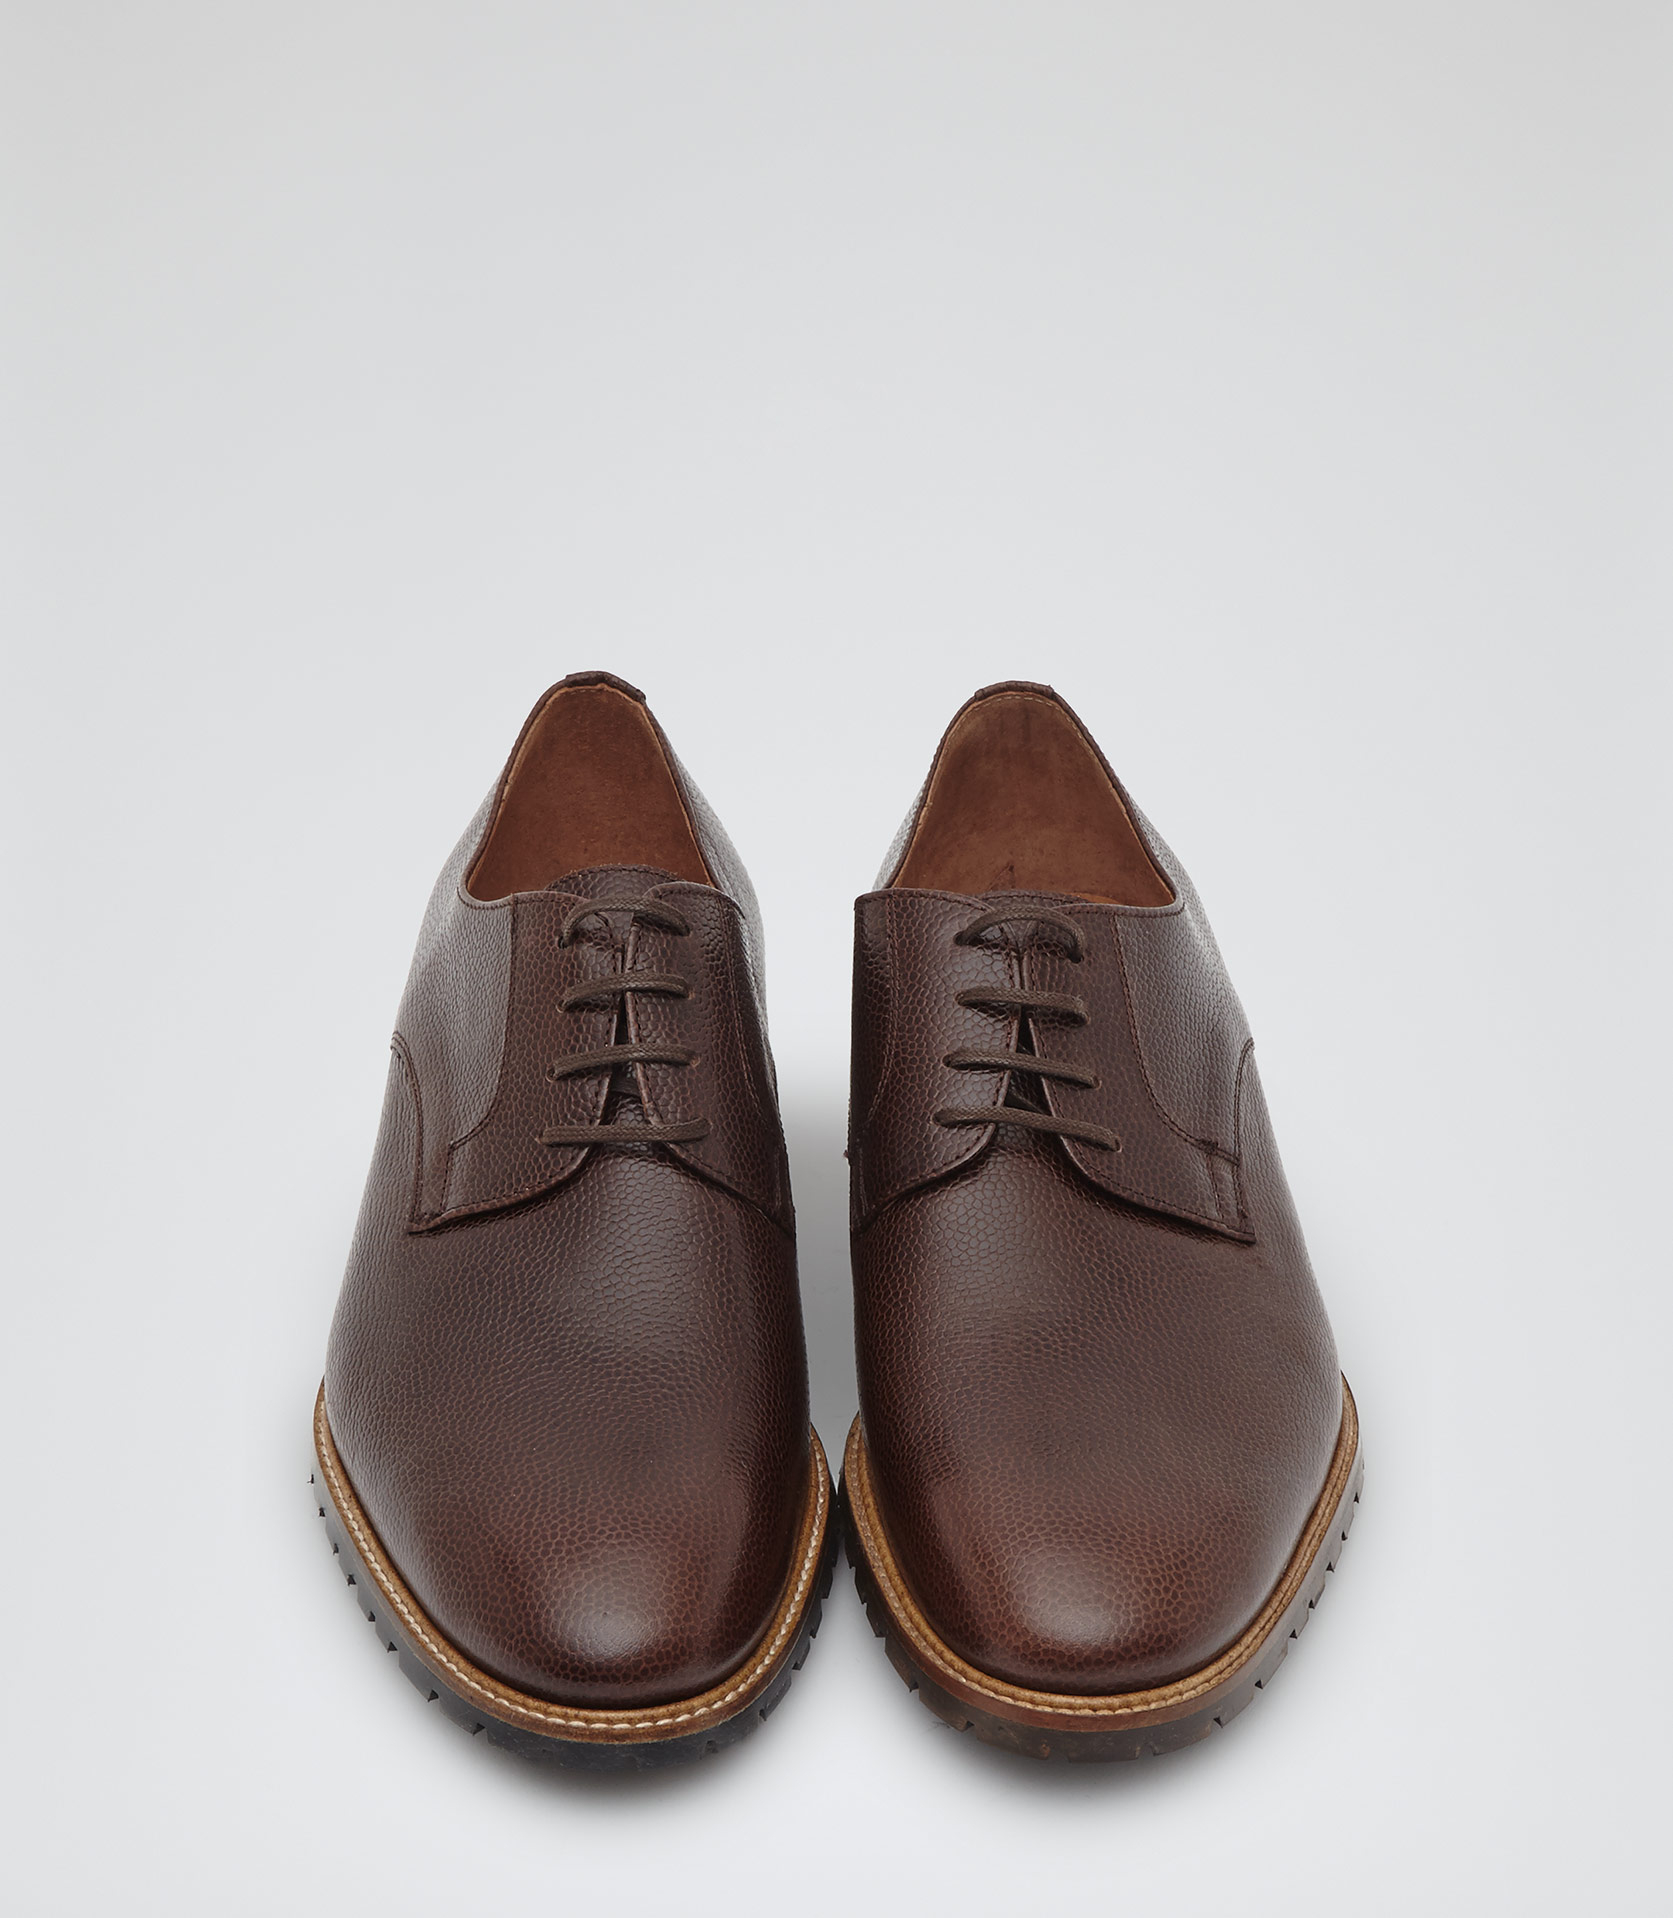 Reiss Conrad Pebble Grain Derby Shoes in Brown for Men - Lyst